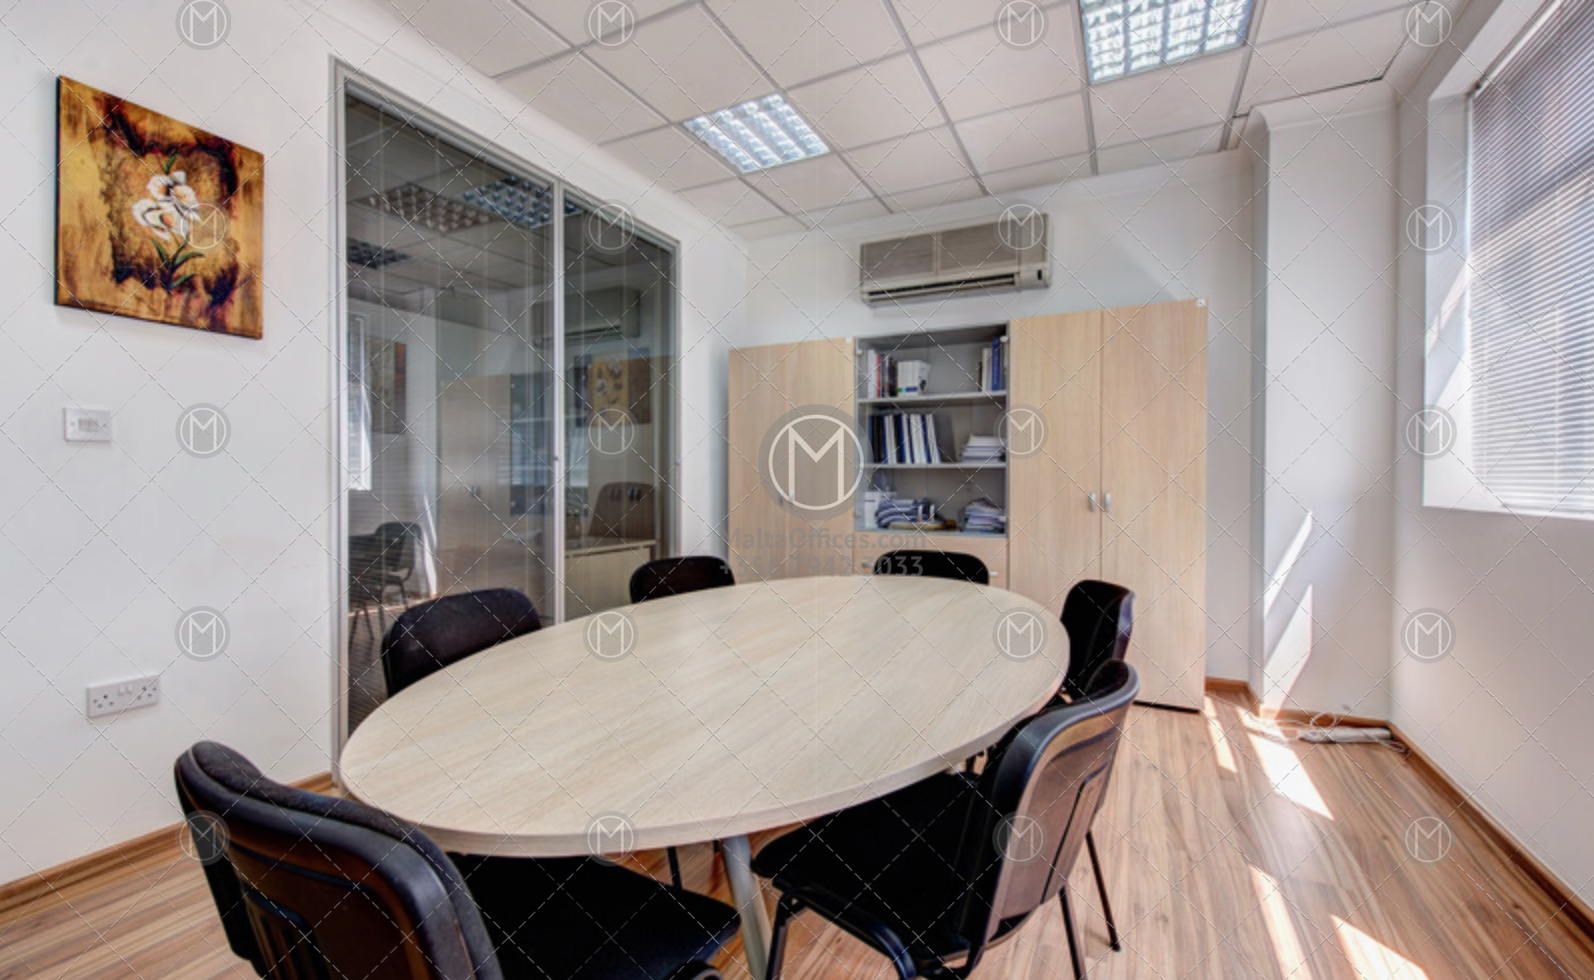 155m2 Offices in Gwardamangia for Rent - (1)